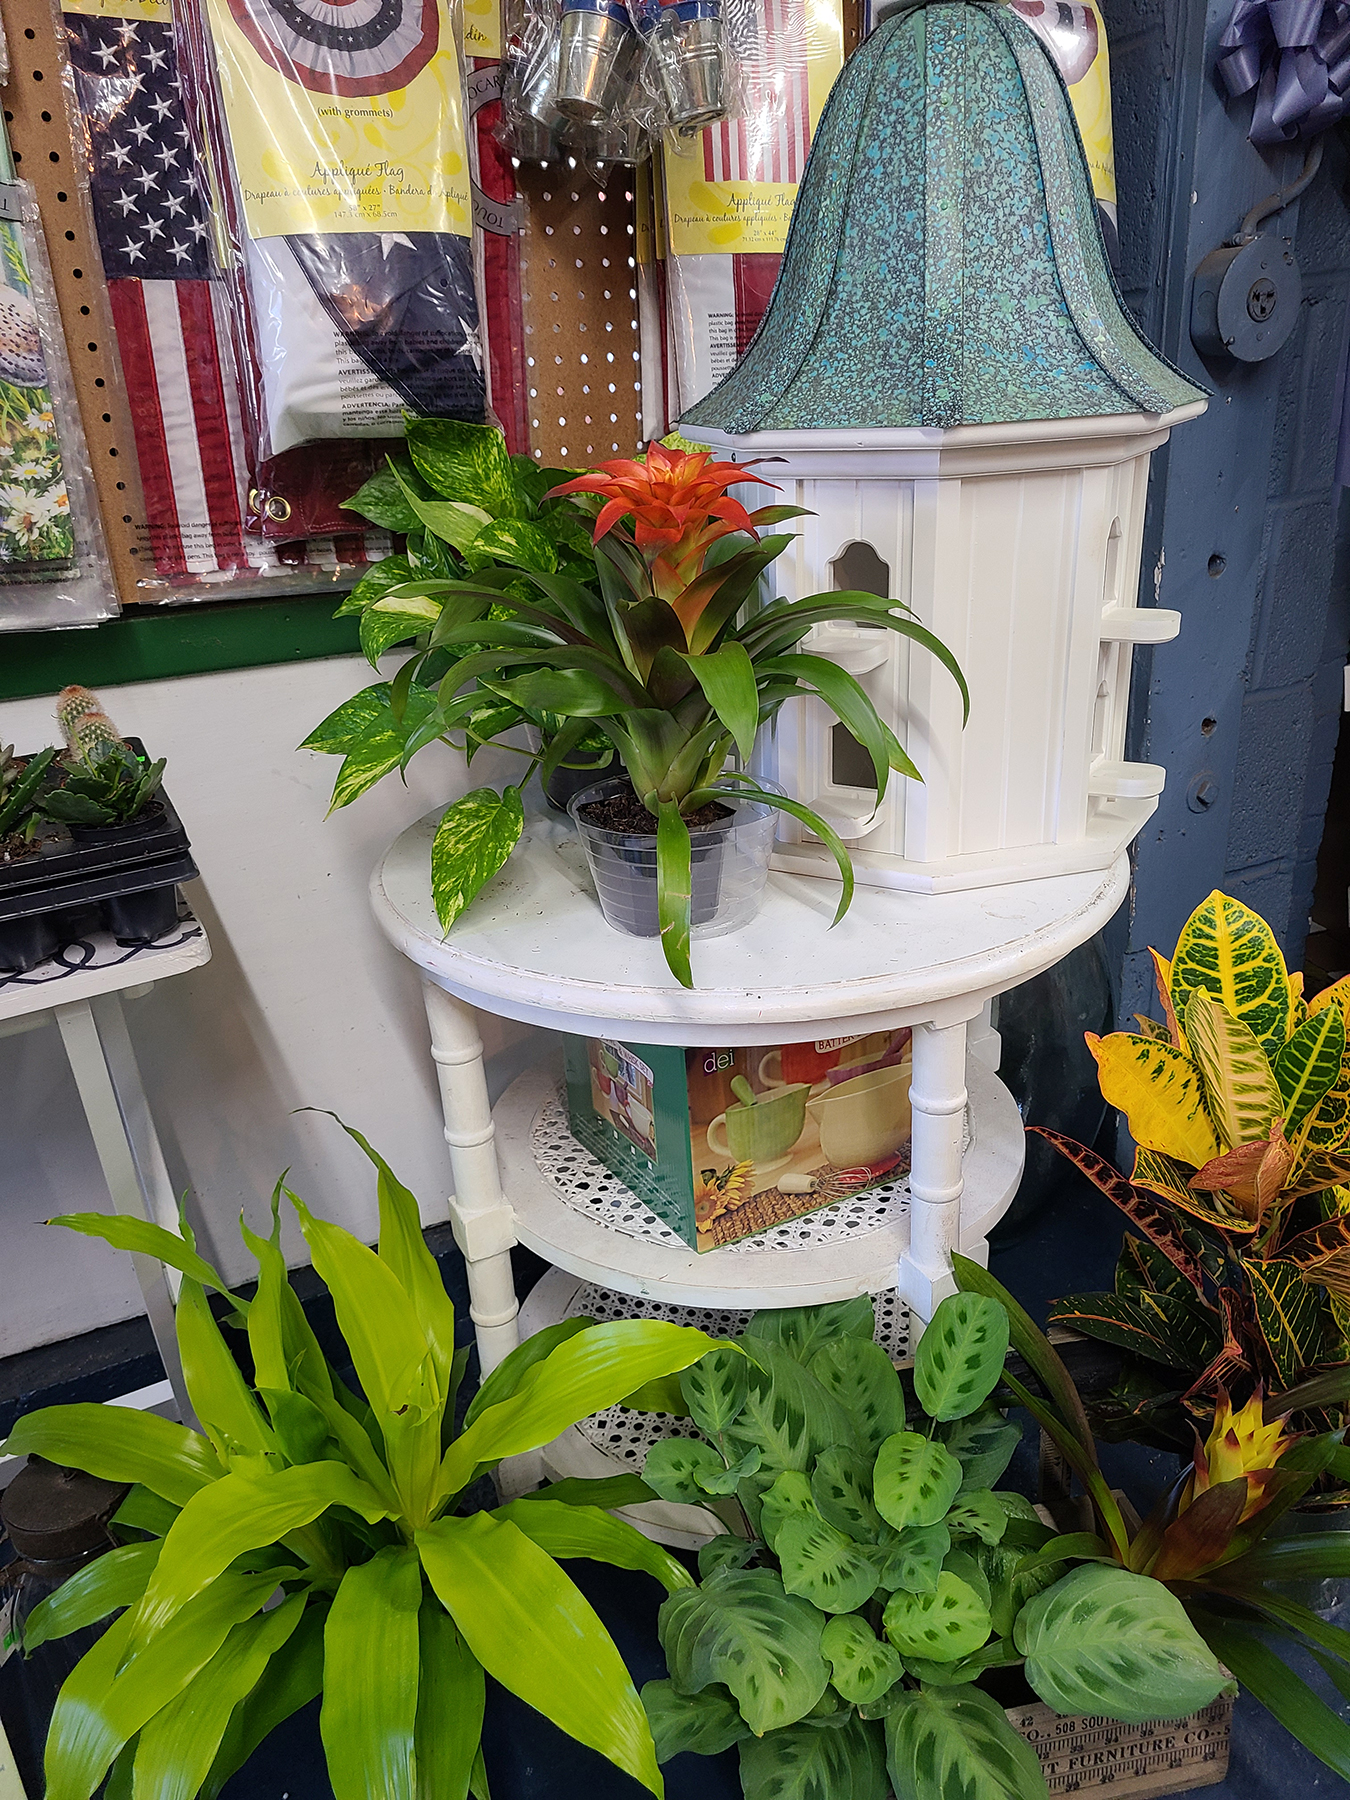 Houseplants and Decor at Goffle Brook Farms